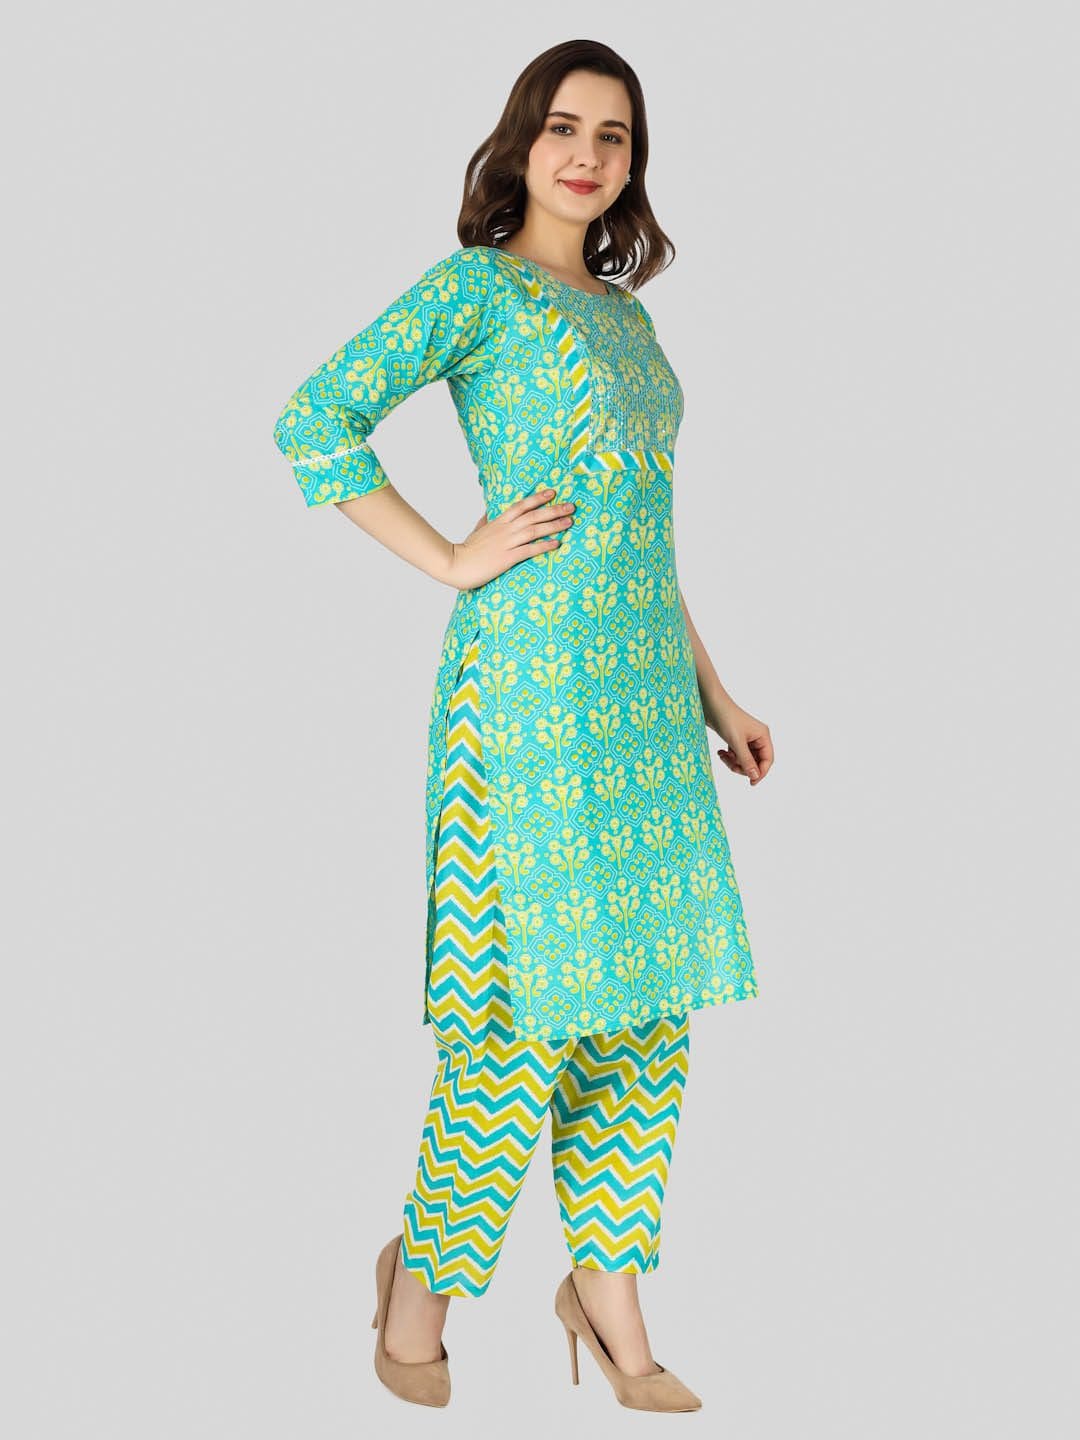 Green Rayon Kurti With Yellow Floral Print Pant For Women